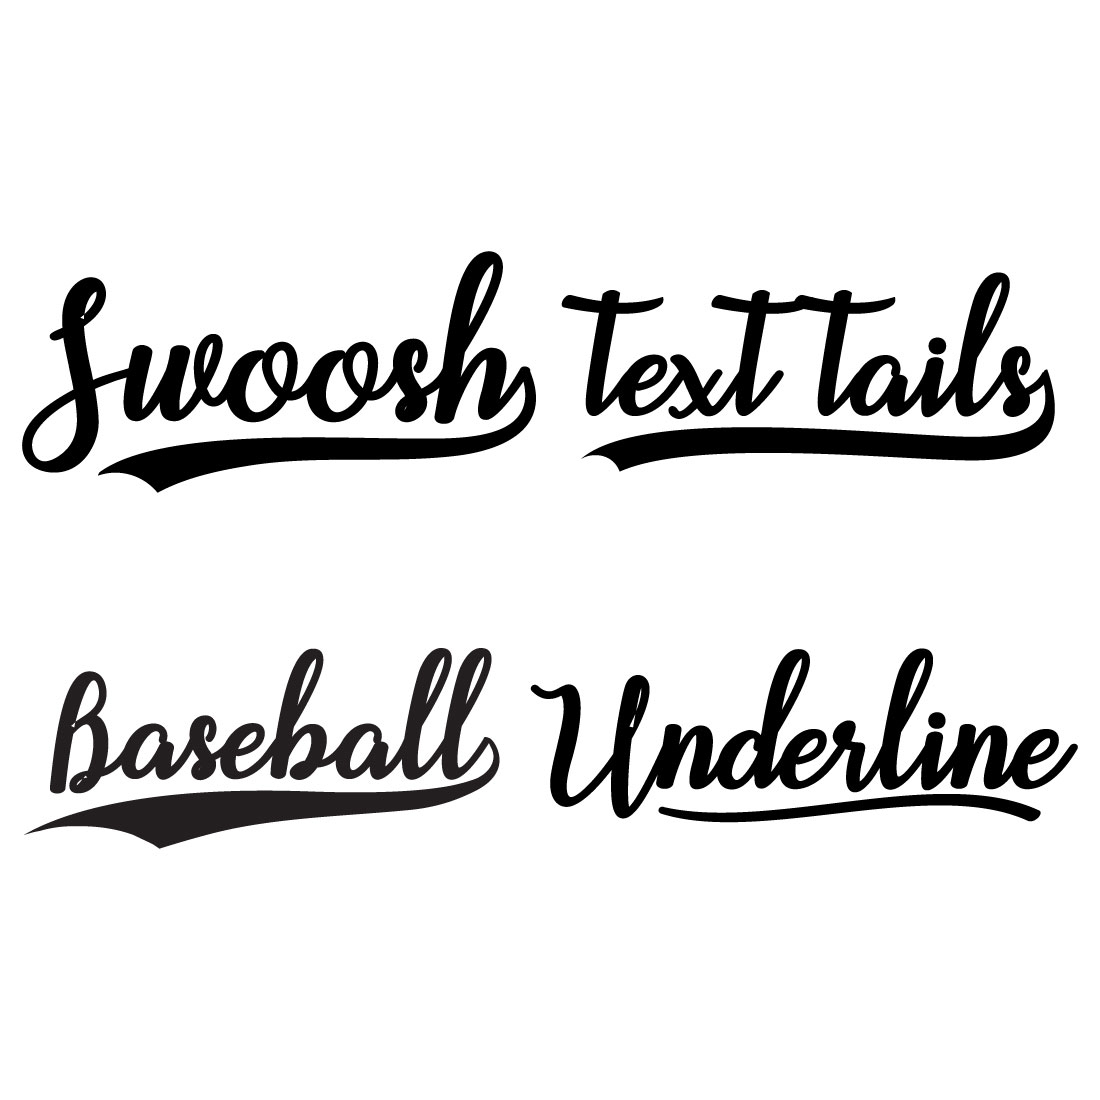 Swash and swooshes tails typography set brush Vector Image